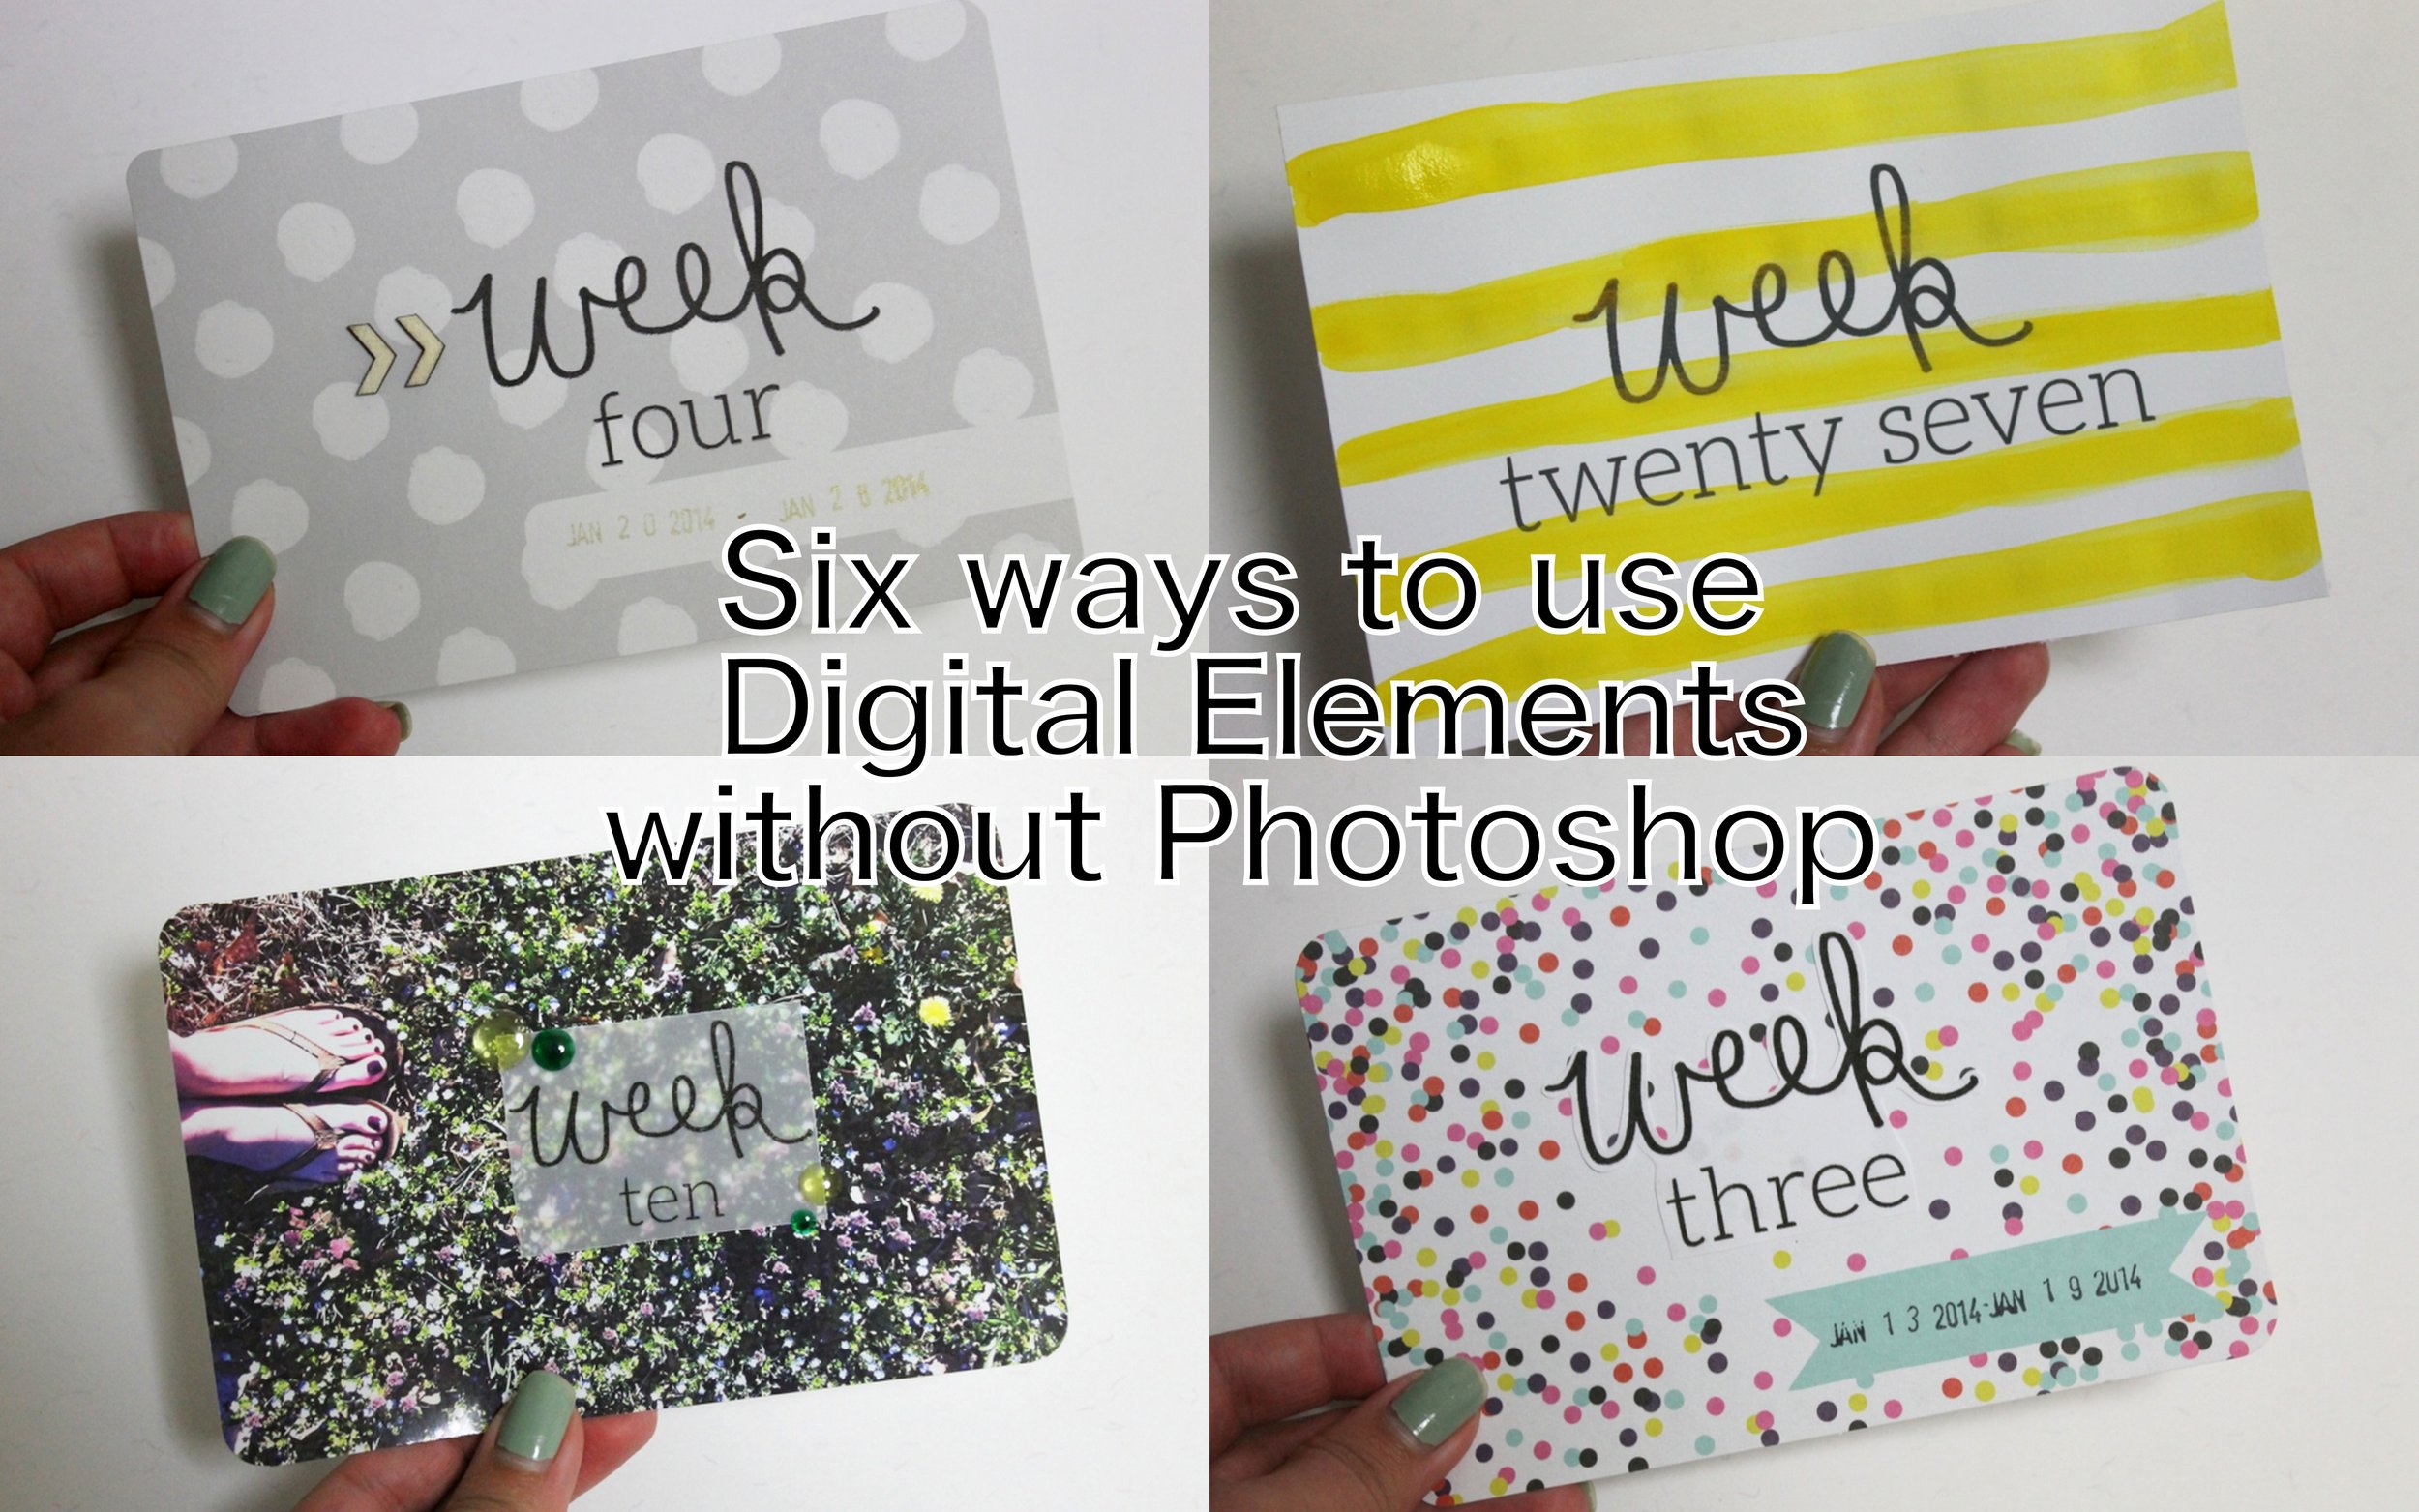 6 ways to use digital elements without photoshop by Lauren Likes